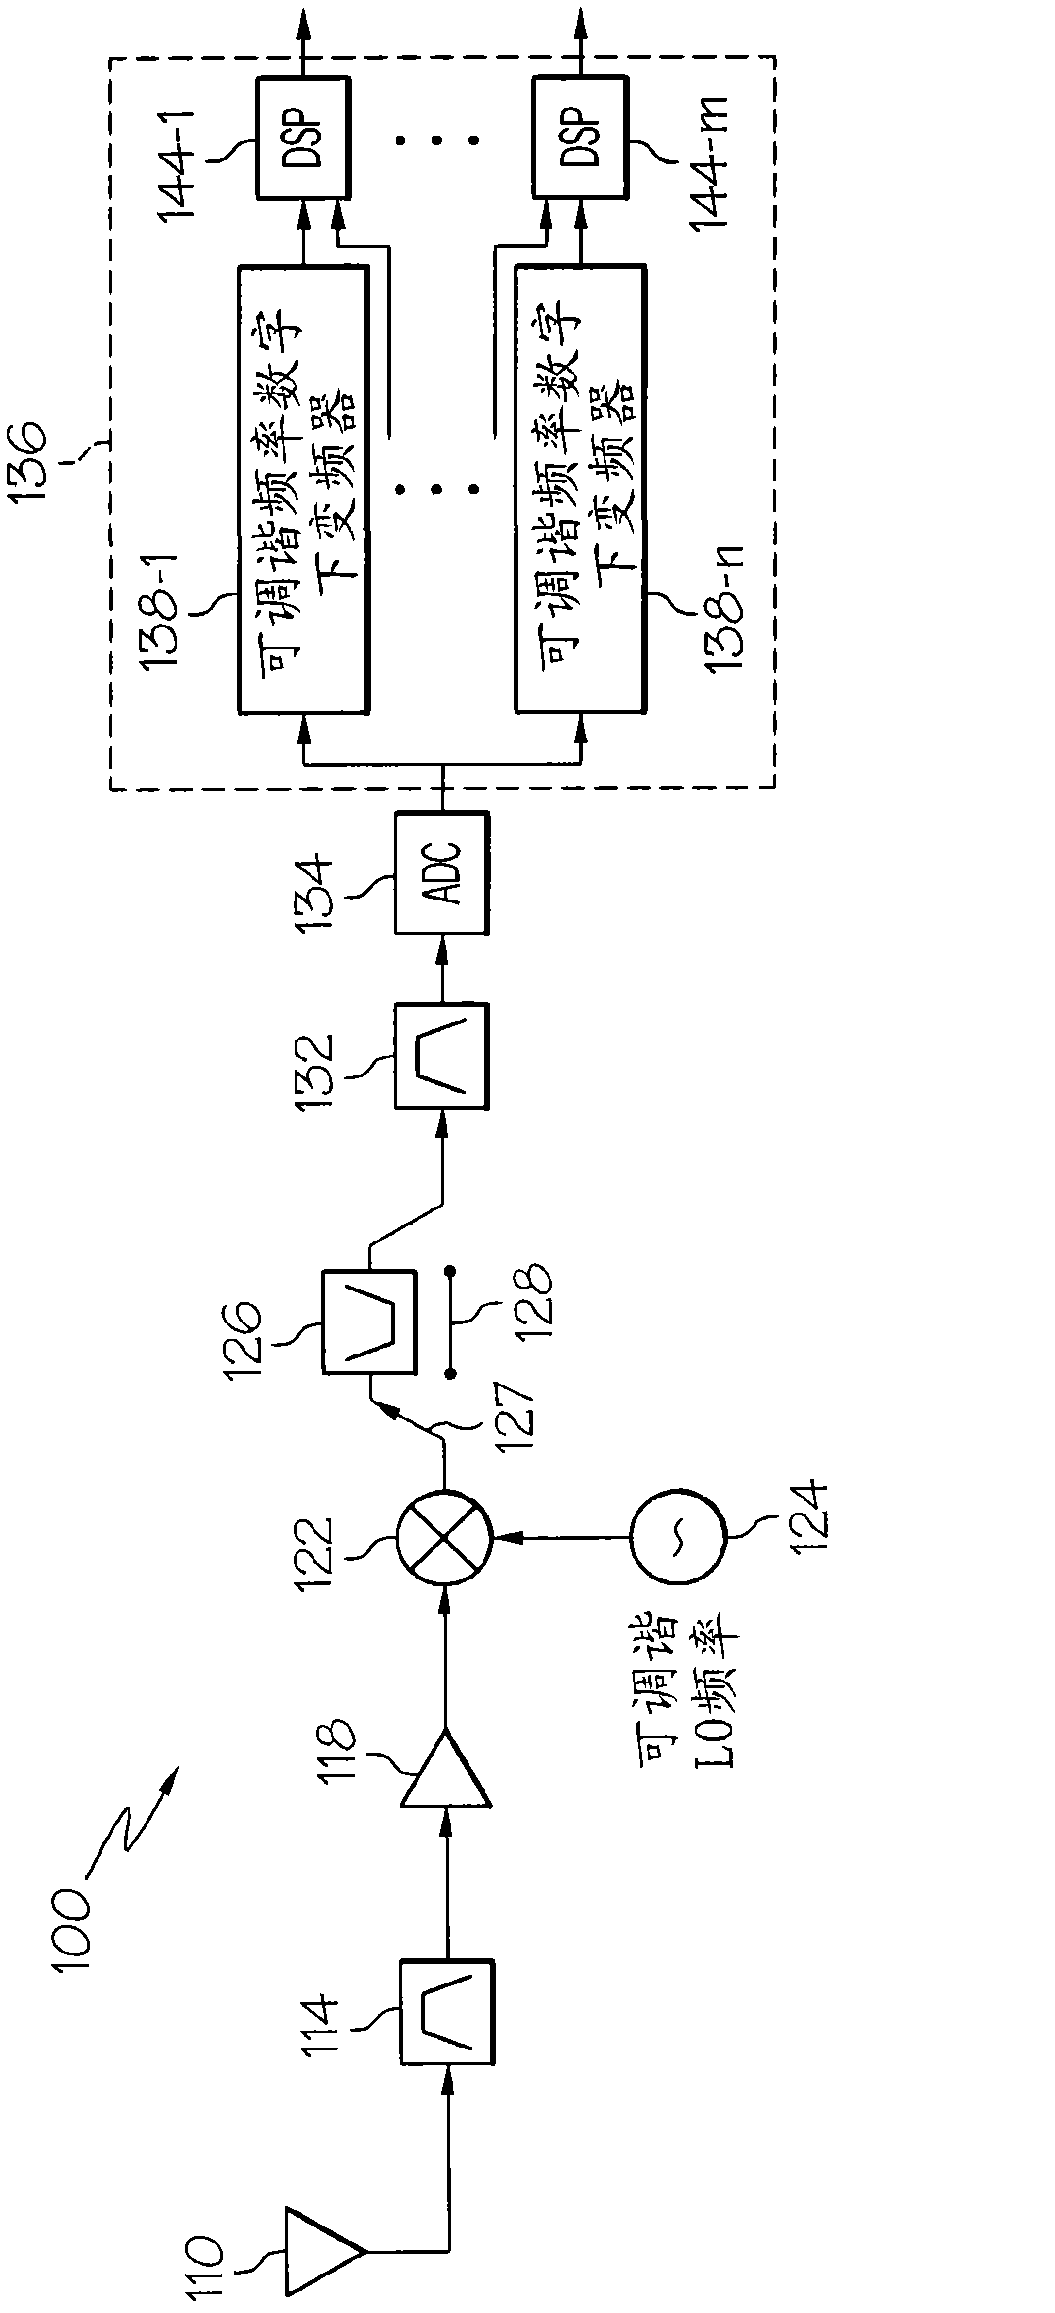 Wideband multi-channel receiver with fixed-frequency notch filter for interference rejection